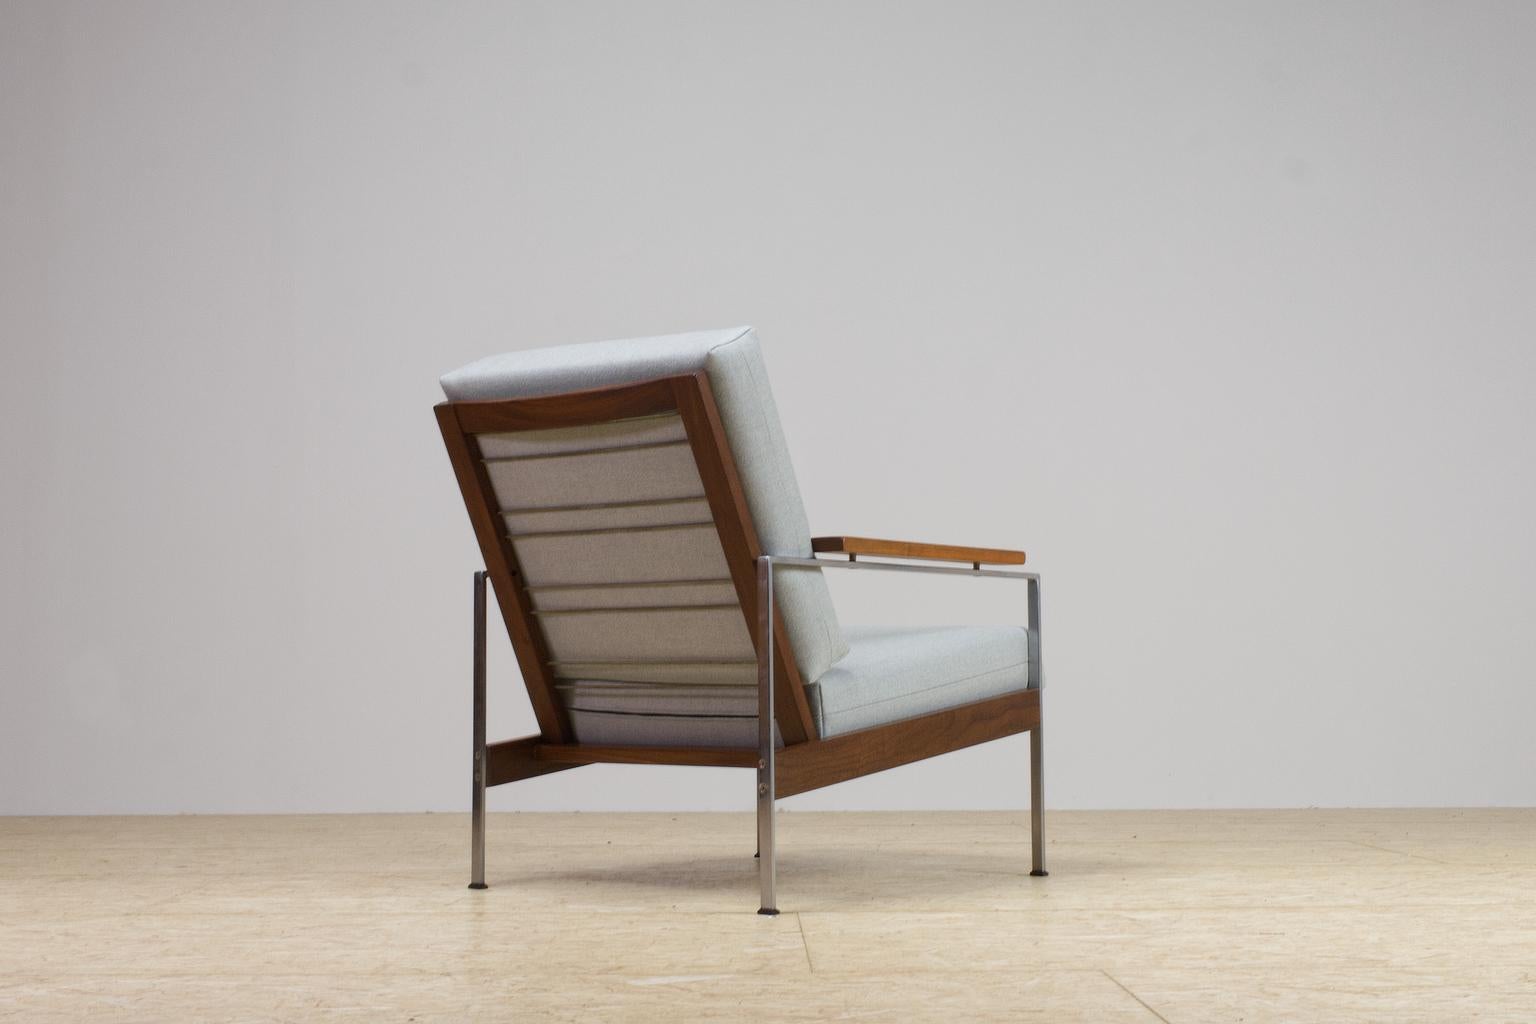 Comfortable and great piece of Dutch heritage. A slender teak and metal lounge chair, model Lotus, designed by Industrial designer Rob Parry, during the 1960s for Gelderland (the Netherlands).

The chair is executed in solid teak and has a slender